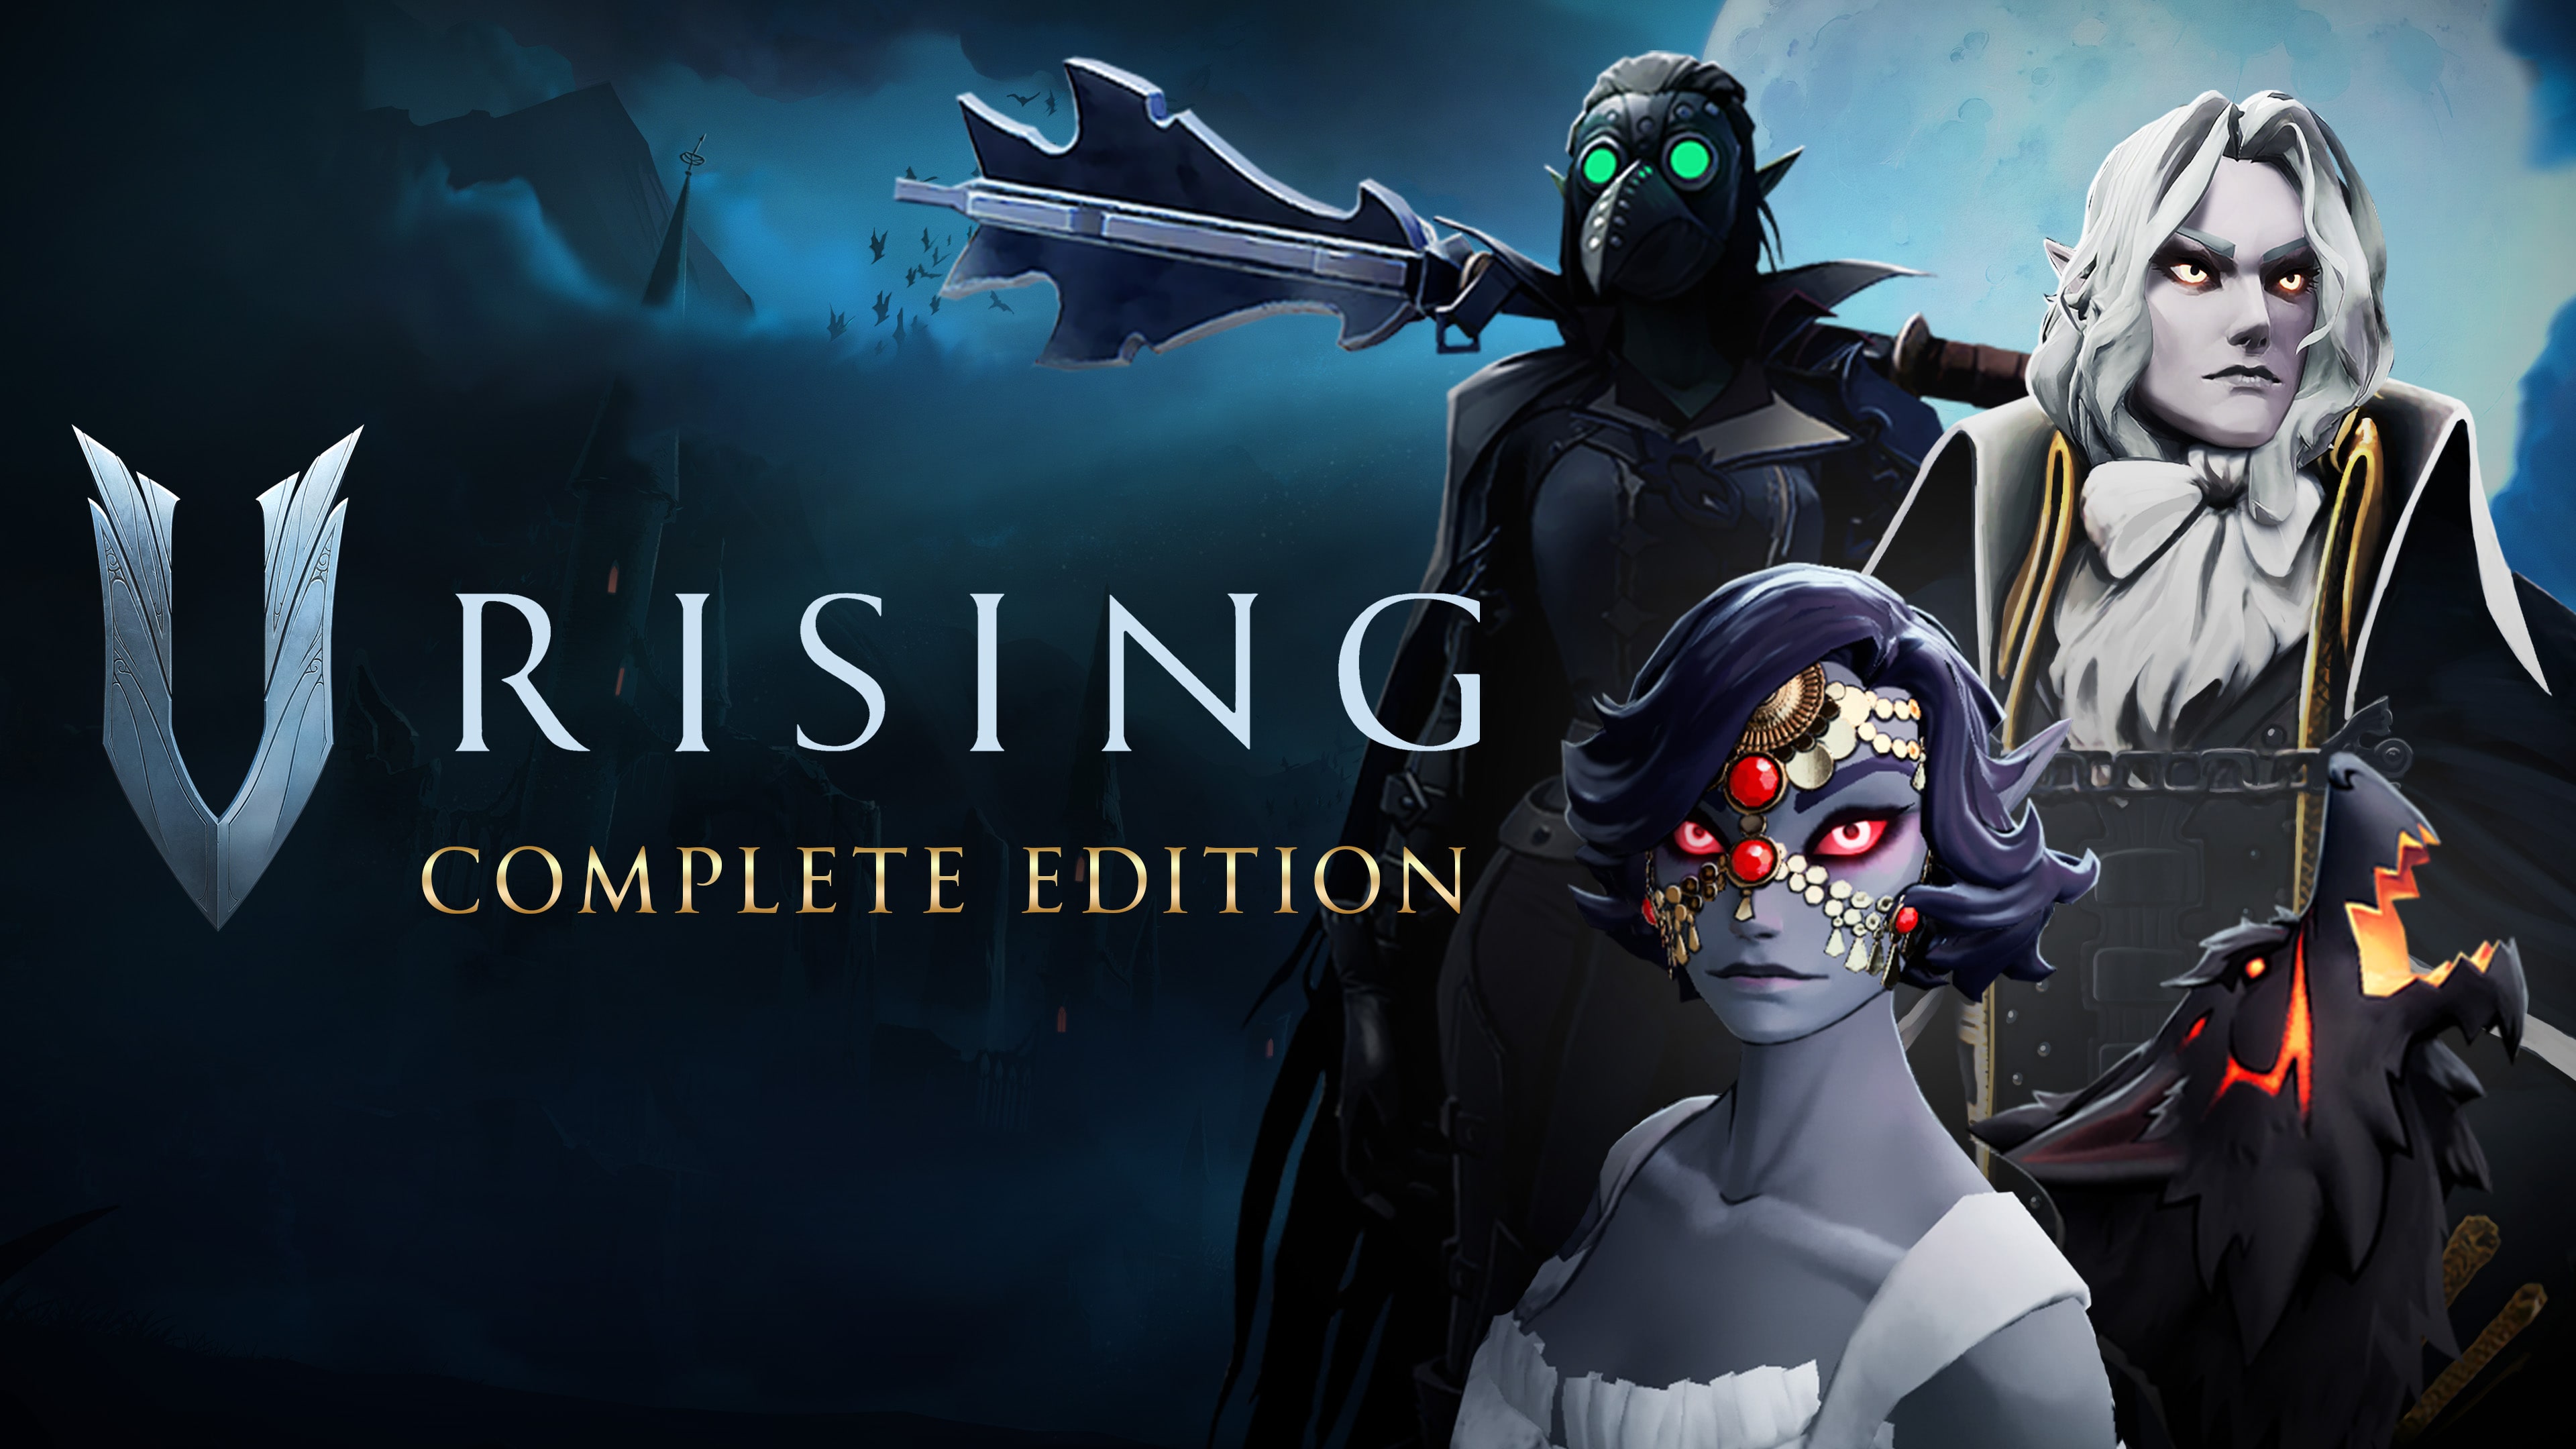 V Rising Complete Edition